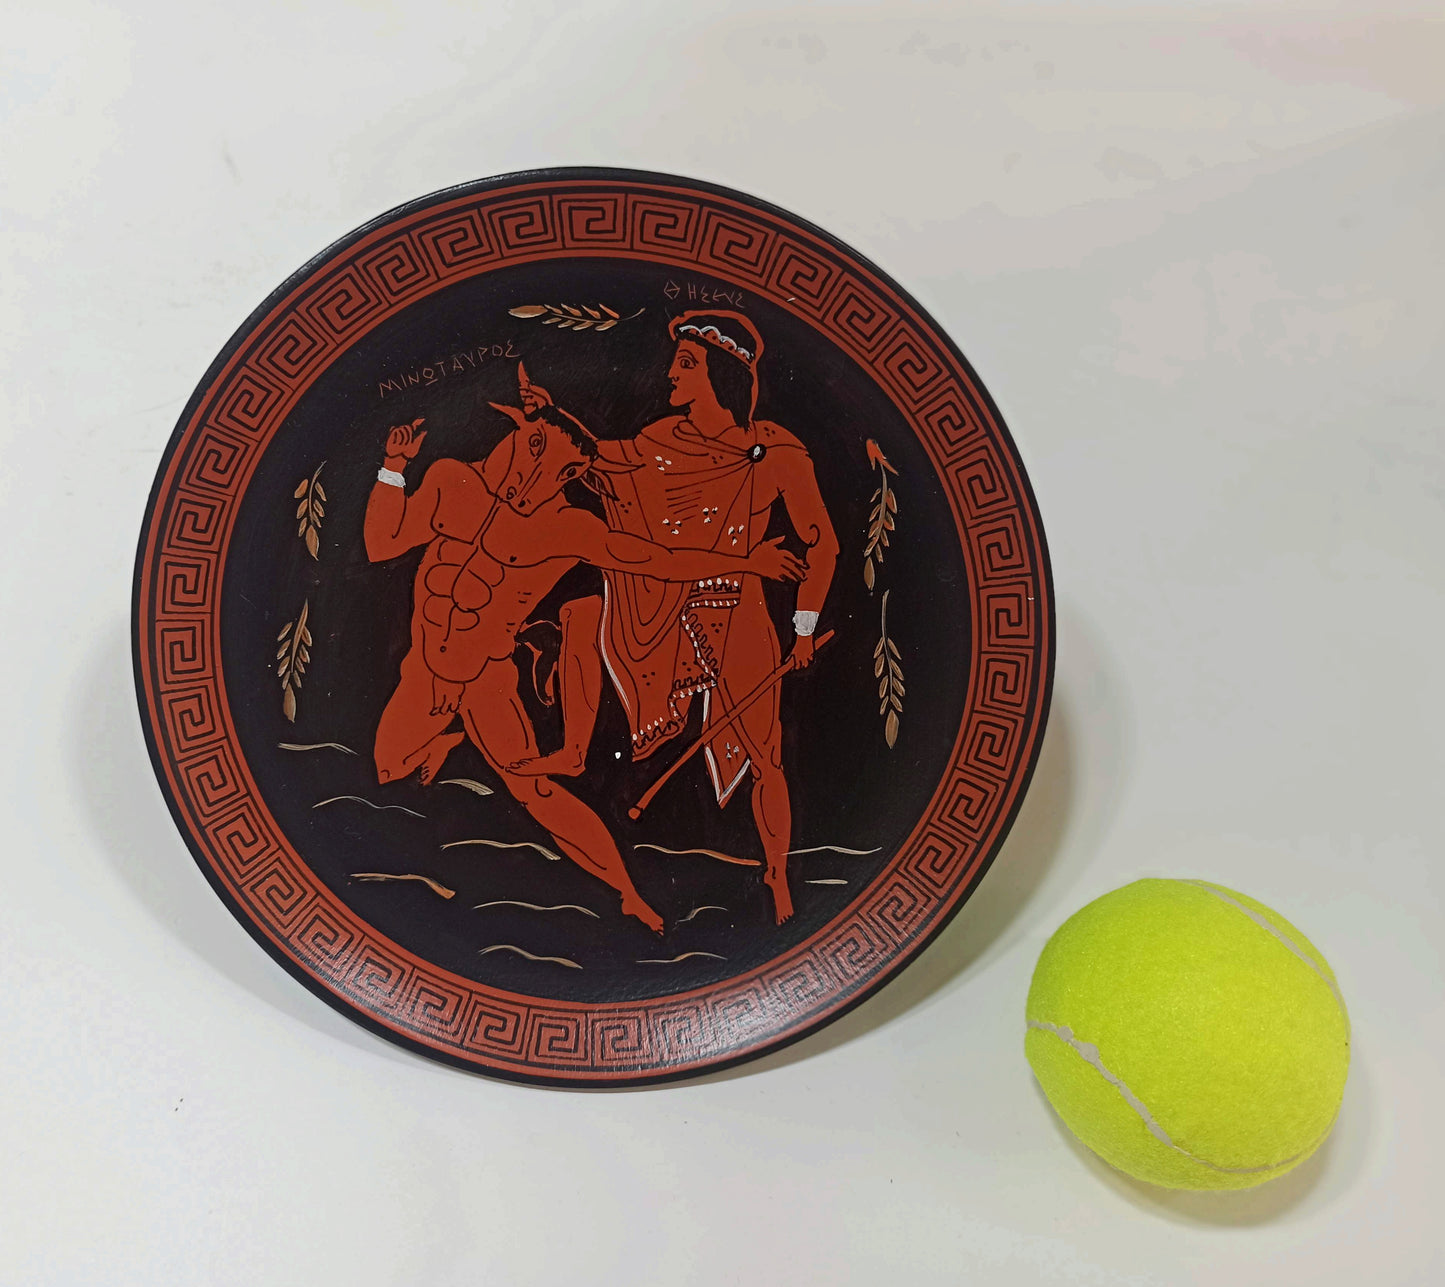 Theseus and the Minotaur - Fight in the Labyrinth of Crete - Hero against Beast- Ceramic plate - Handmade in Greece